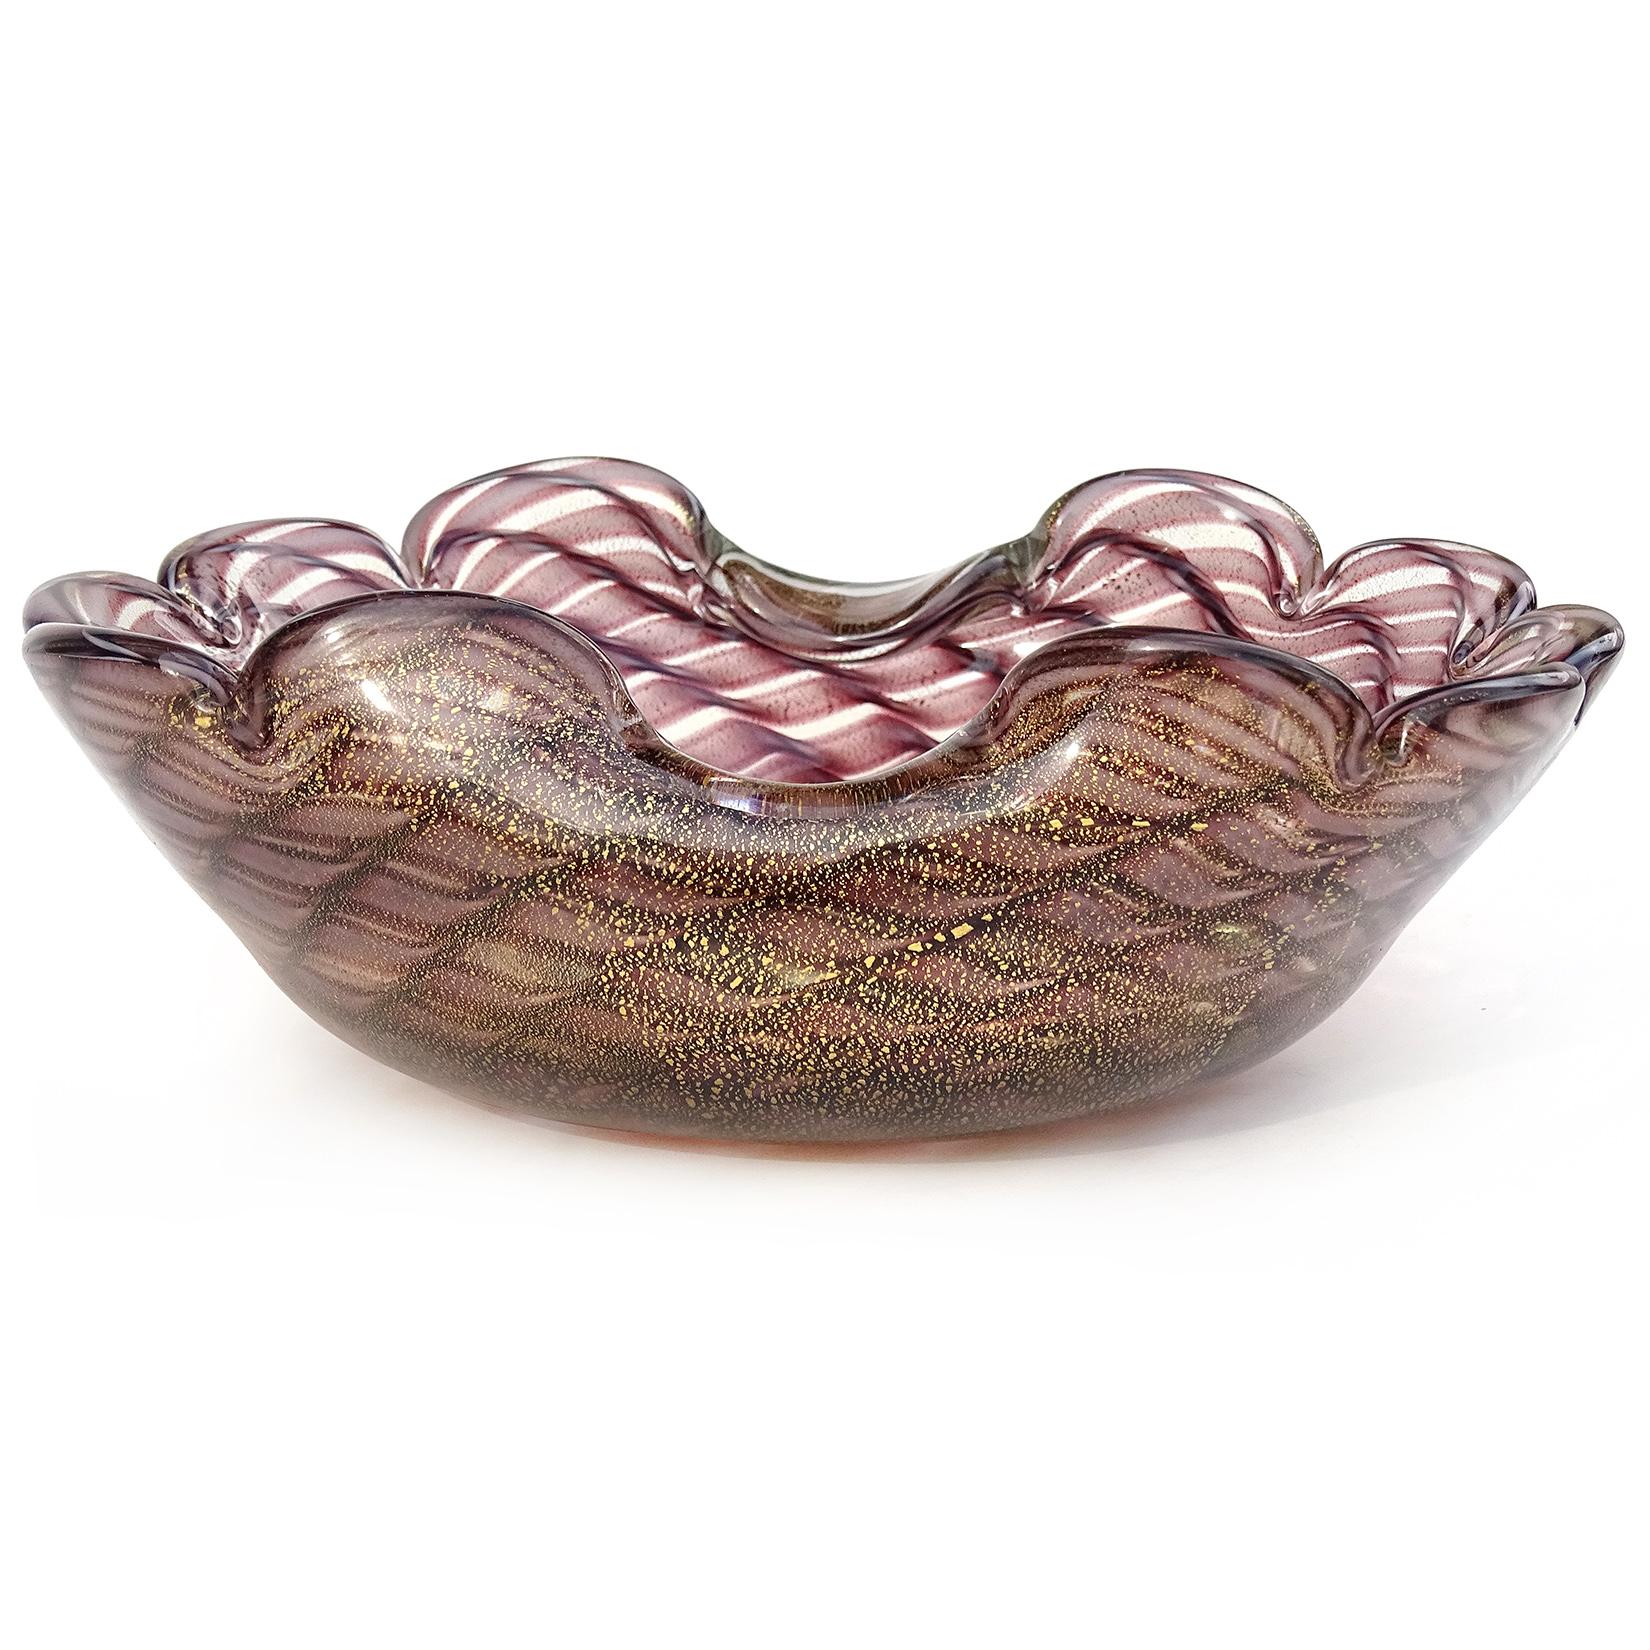 Beautiful vintage Murano hand blown purple and gold flecks Italian art glass decorative bowl. Created in the manner of the Barovier & Toso and Seguso companies. The bowl has a bold swirling pattern in dark and light purple. The design looks like a